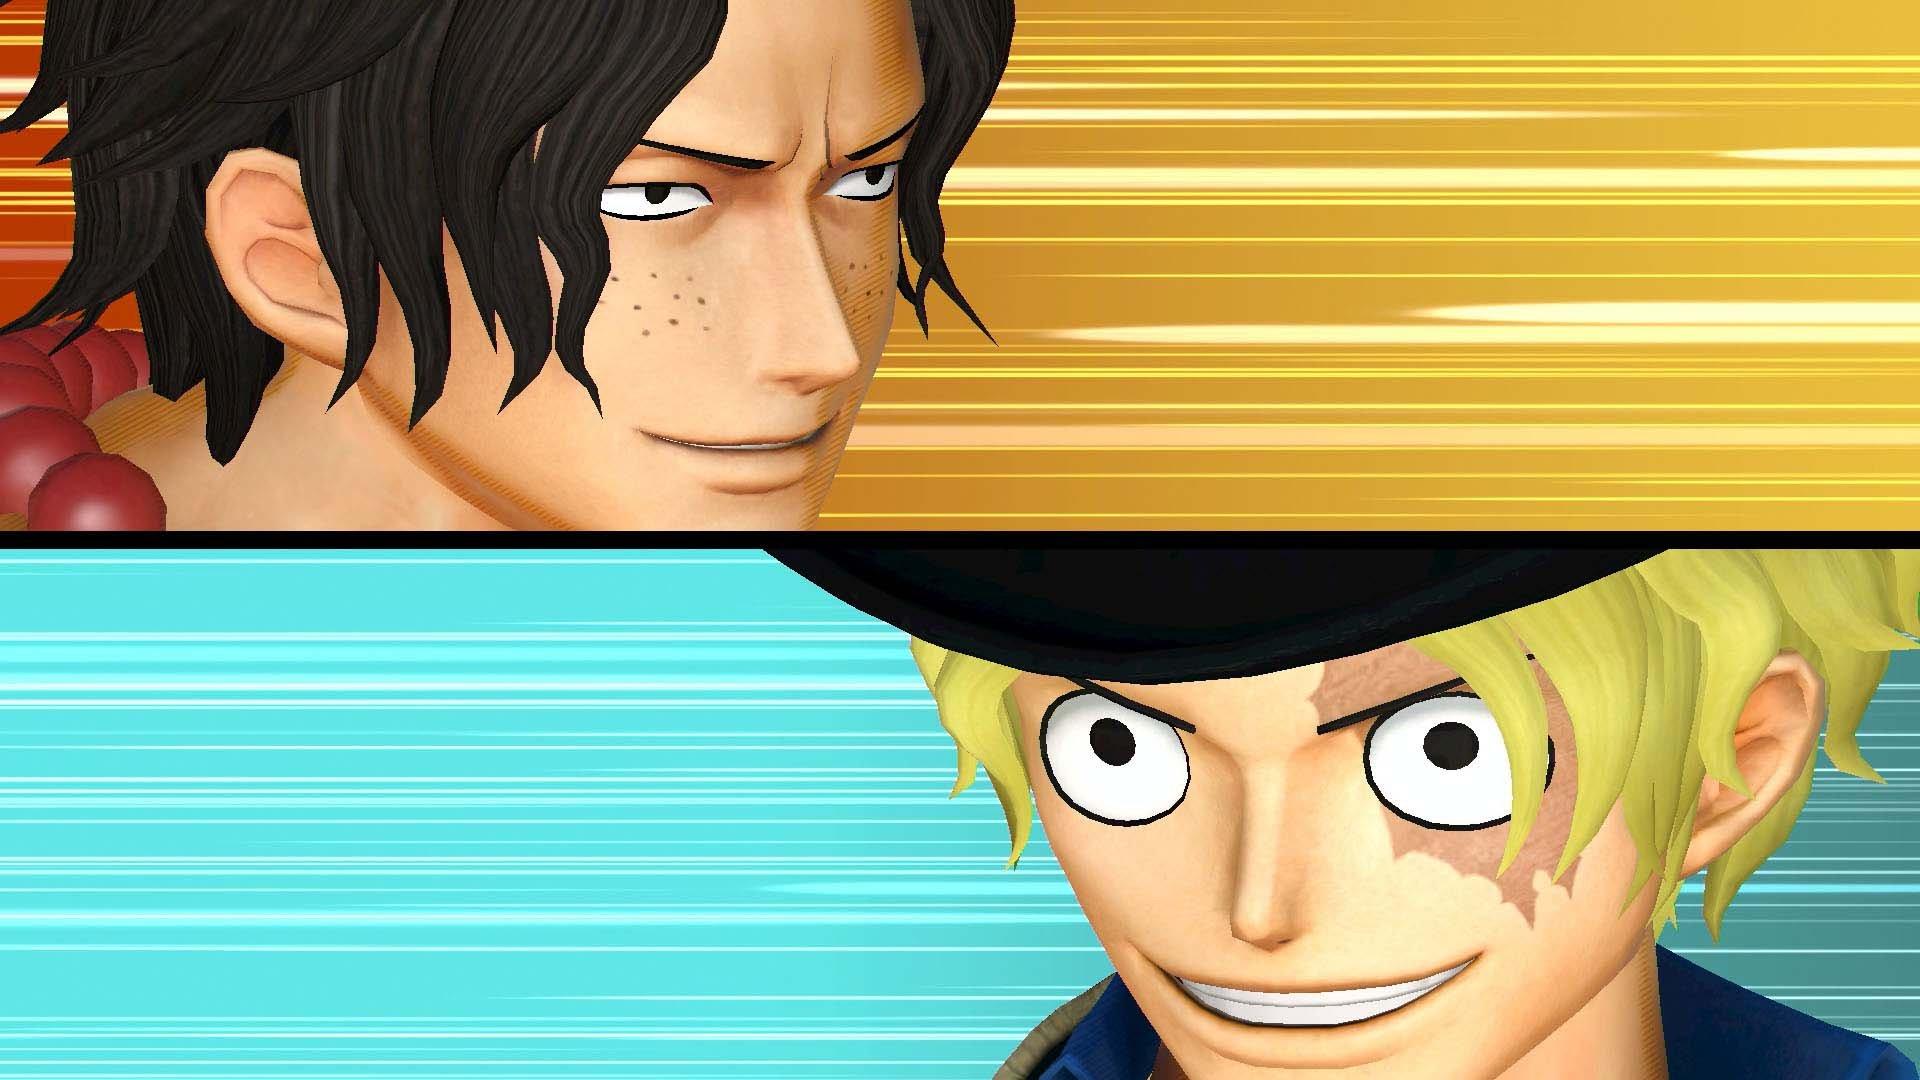 One Piece Pirate Warriors 3 - PlayStation 4